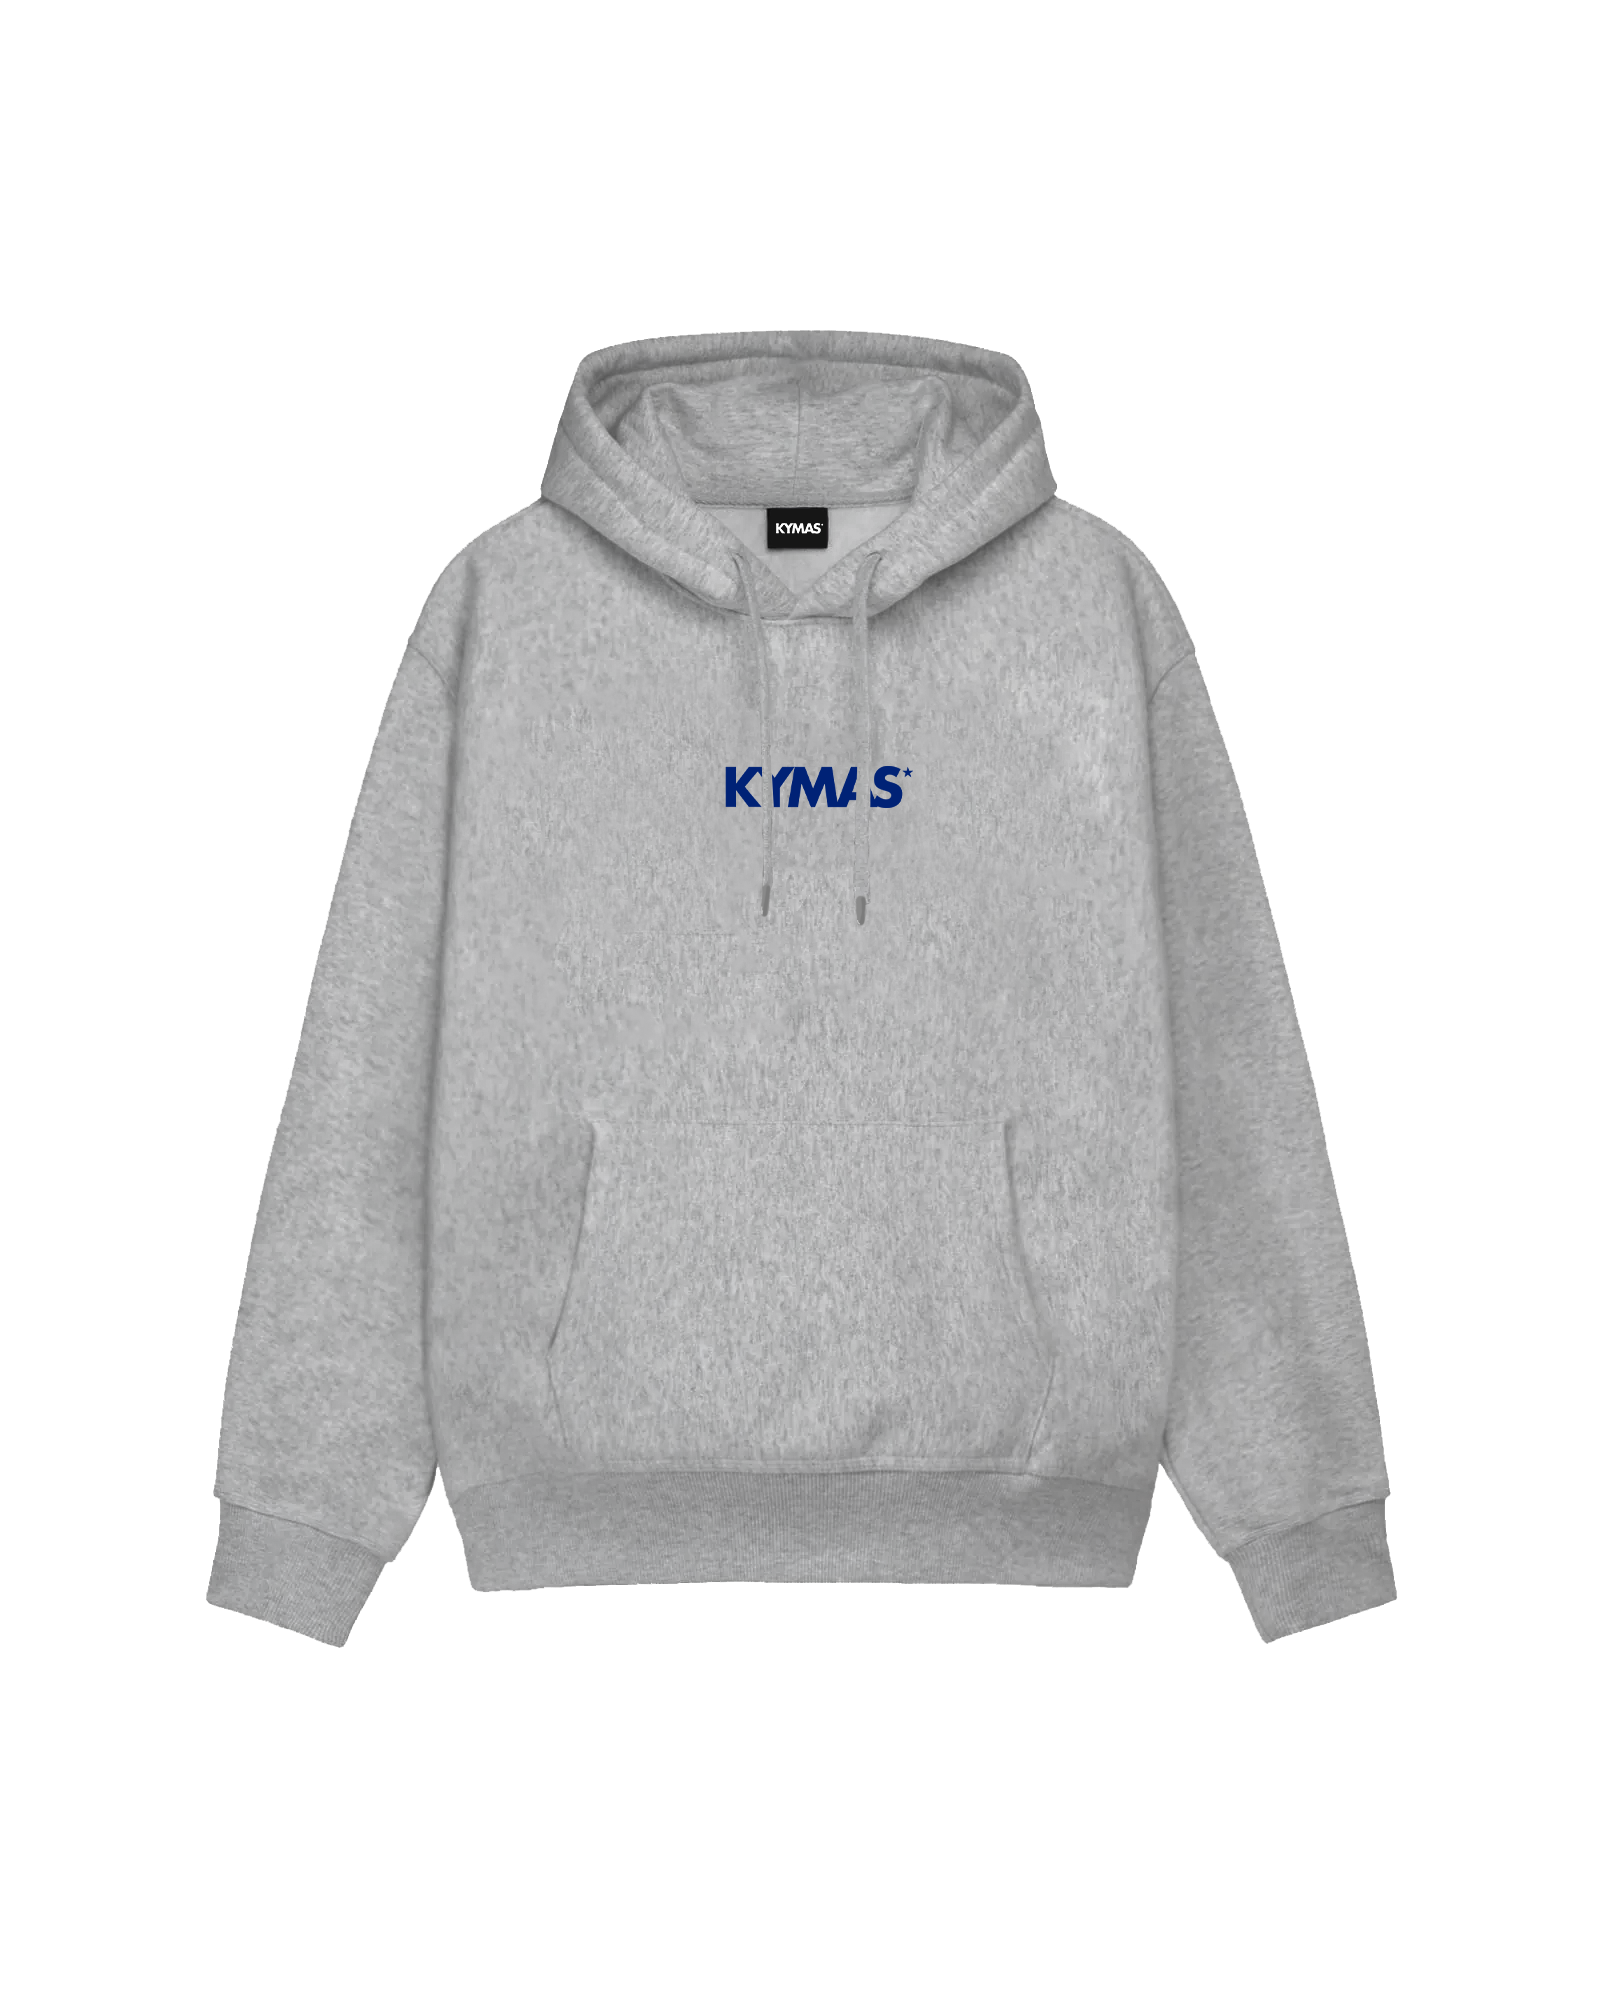 Moscow hoodie